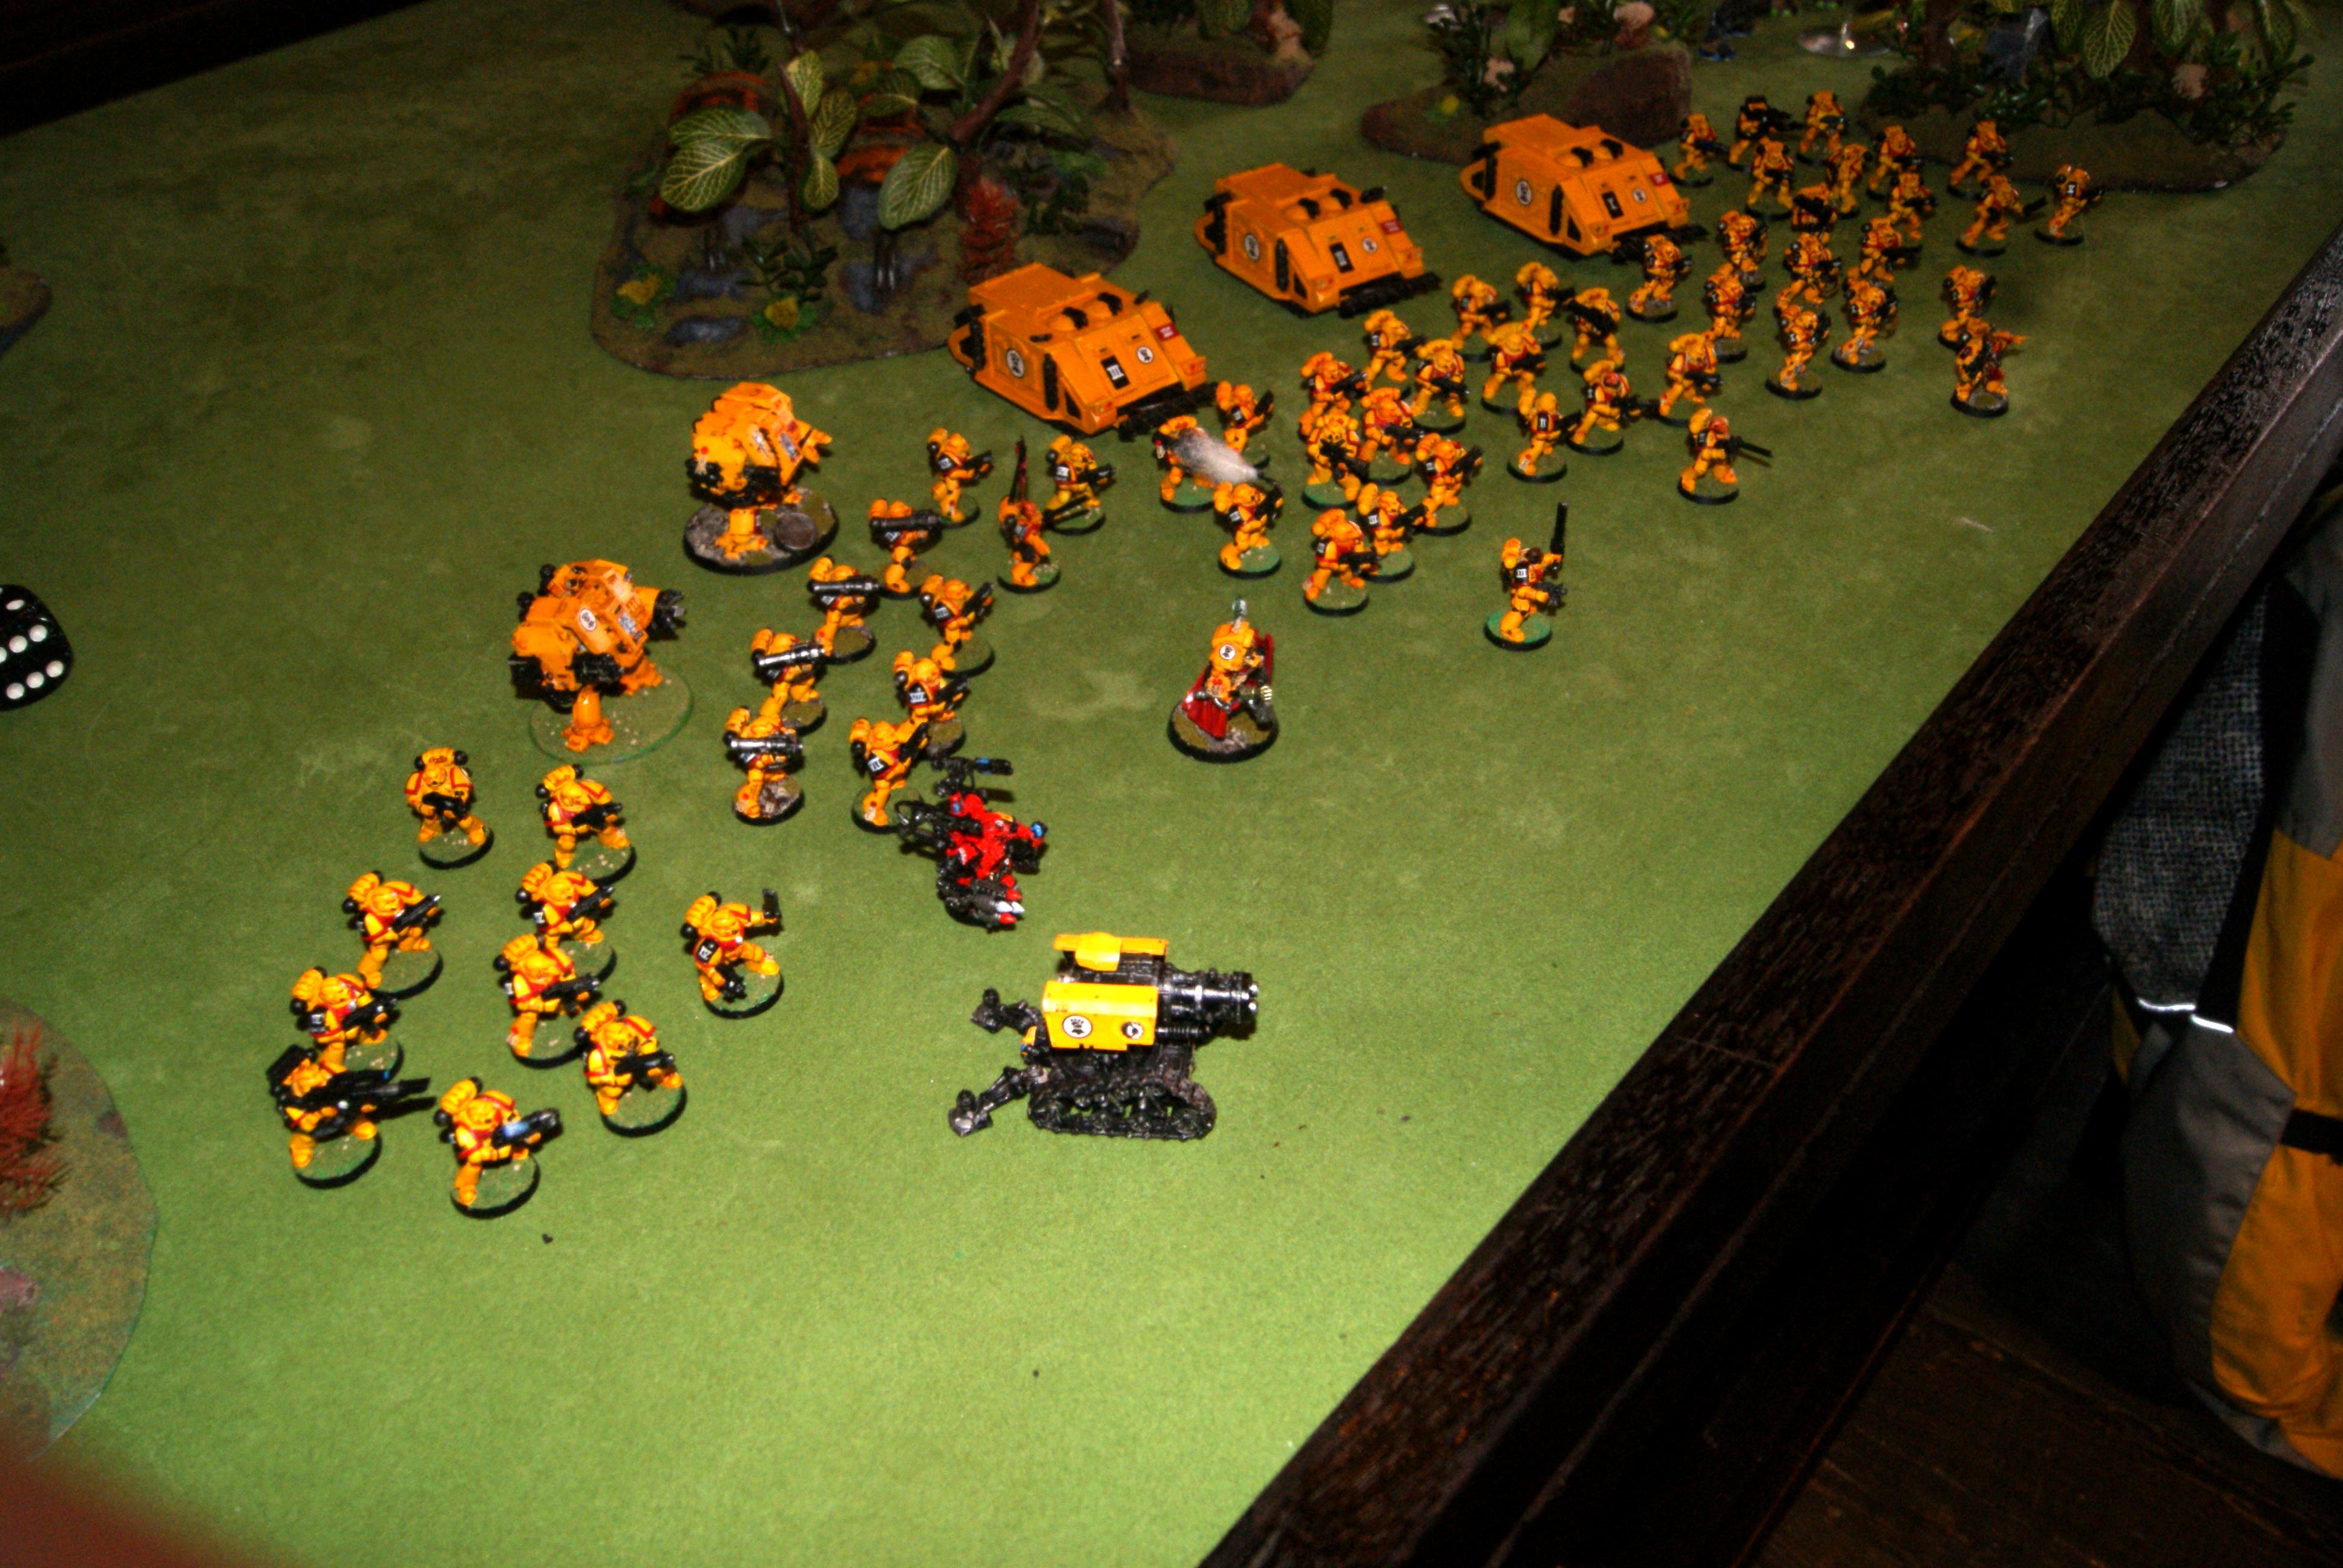 Imperial fist swarm